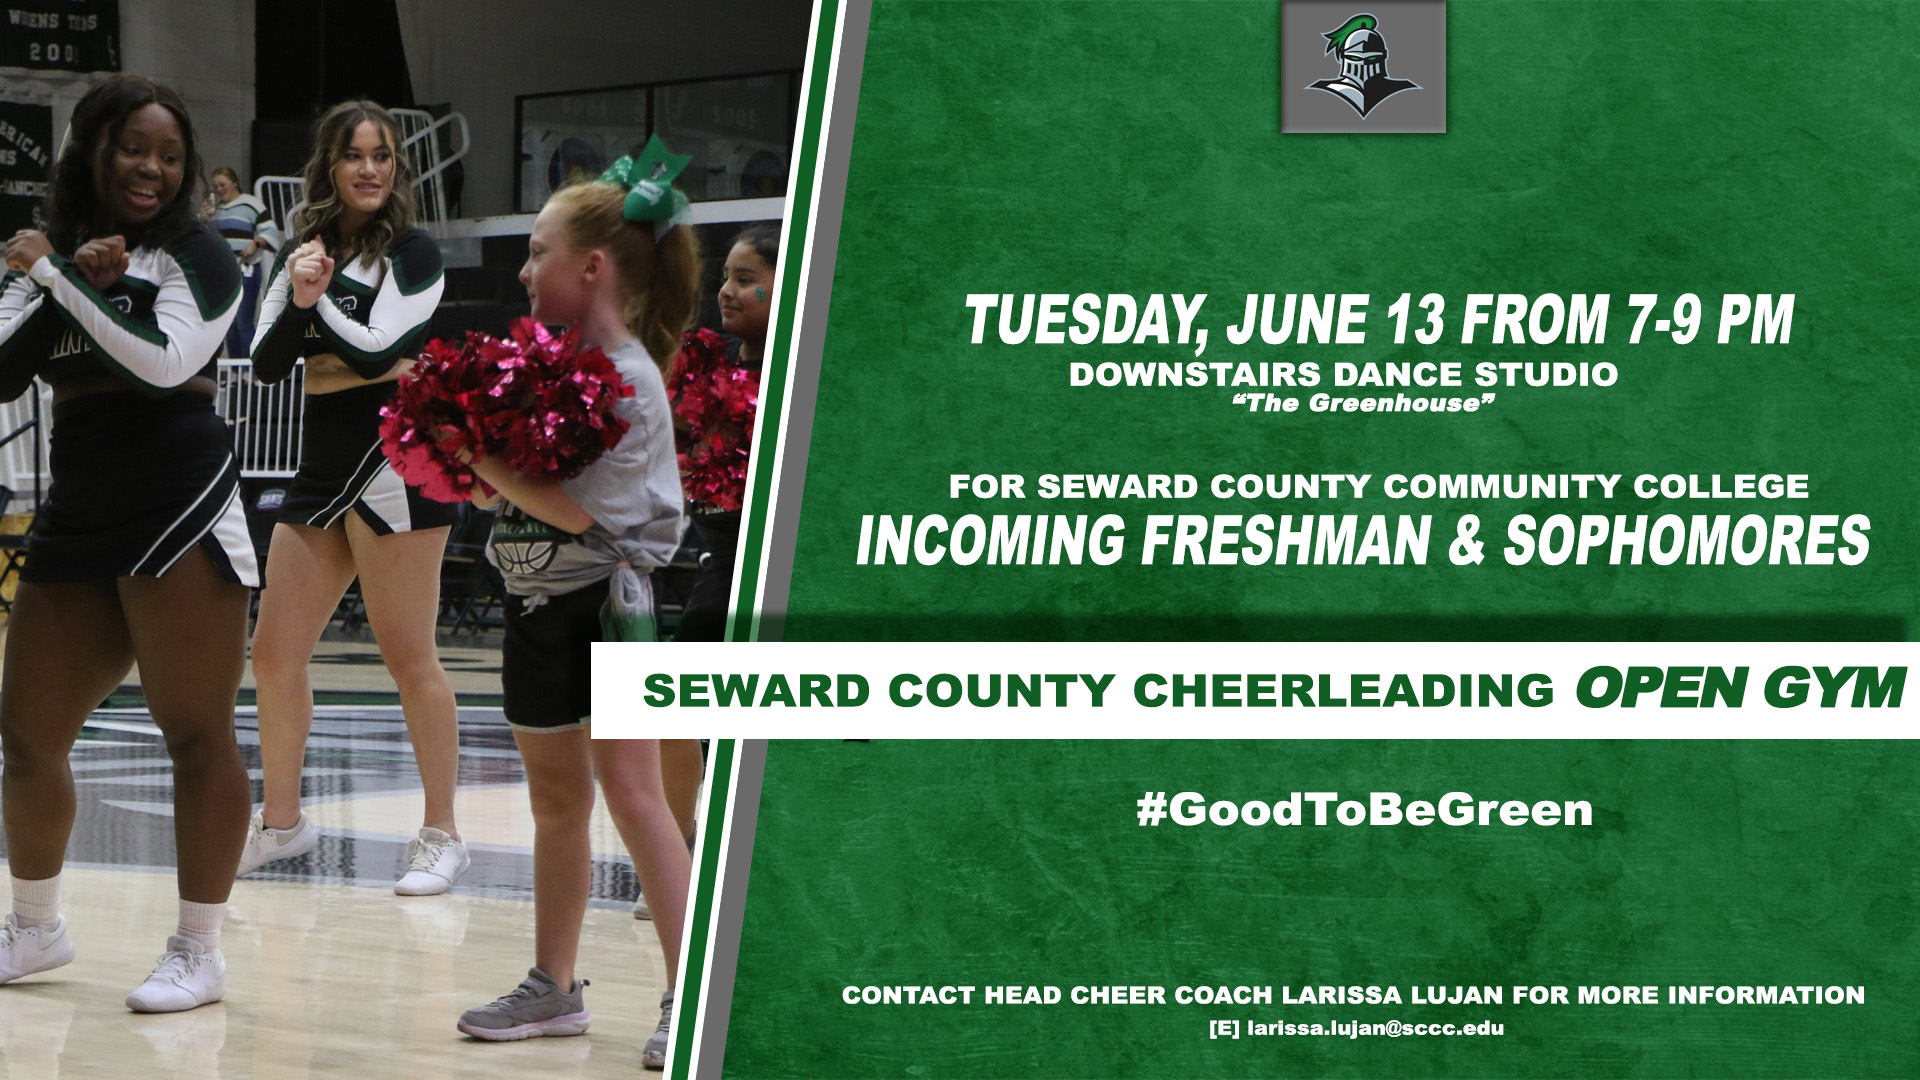 Seward County Cheerleading to host Open Gym Tuesday, June 13th